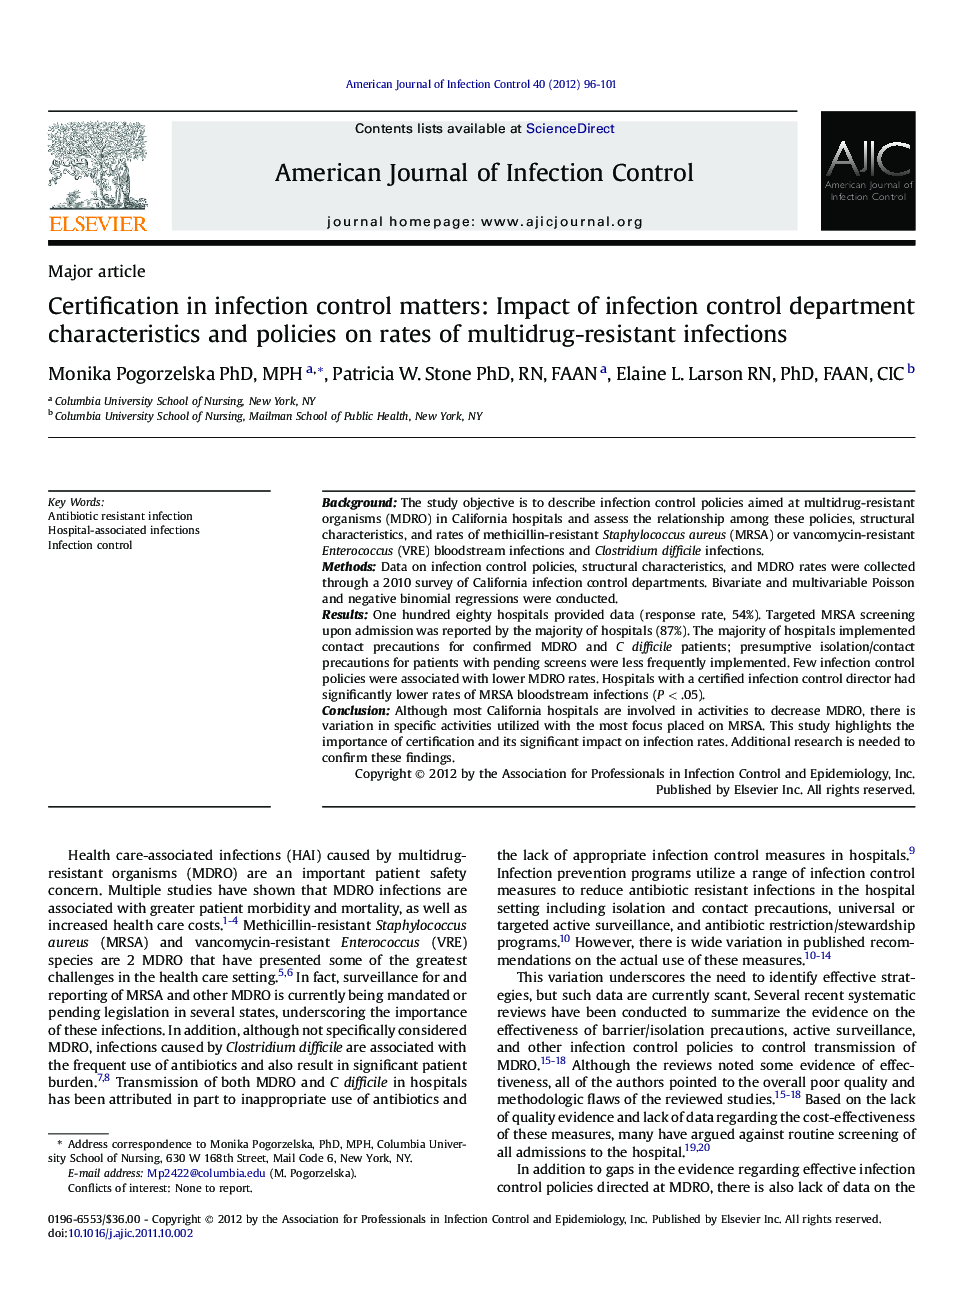 Certification in infection control matters: Impact of infection control department characteristics and policies on rates of multidrug-resistant infections 